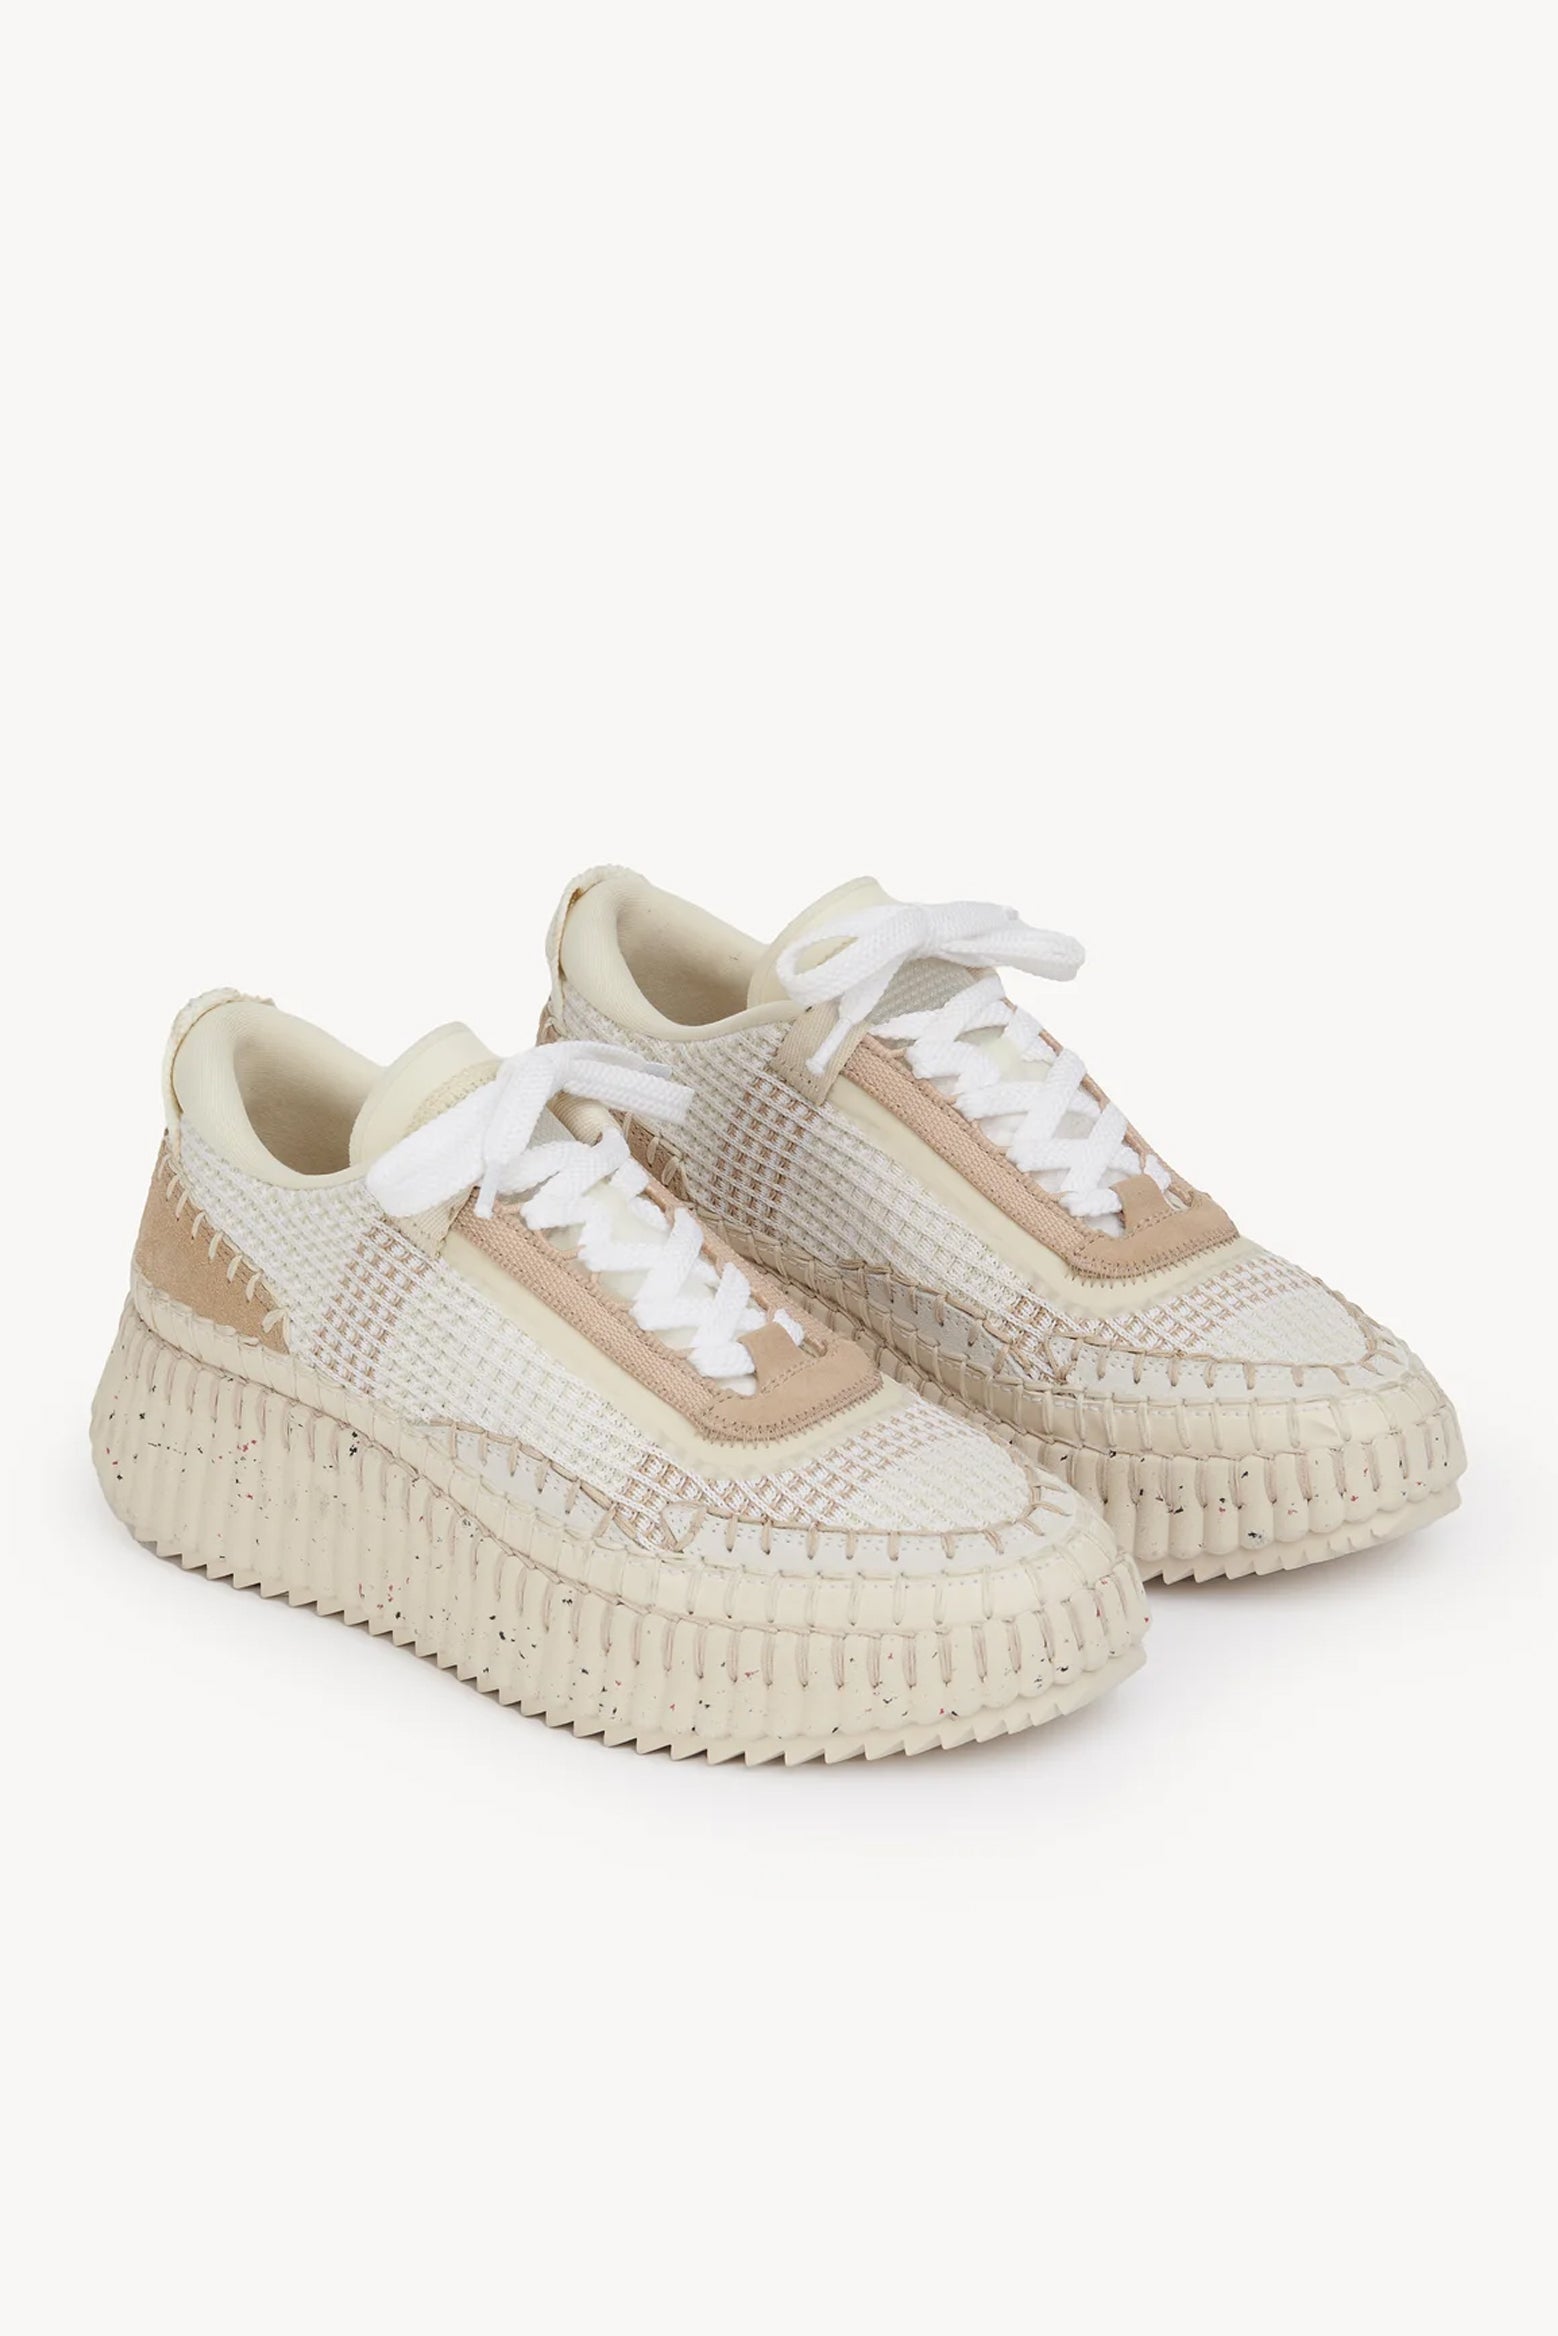 Chloé Nama Sneaker in Pearl Beige available at The New Trend Australia.